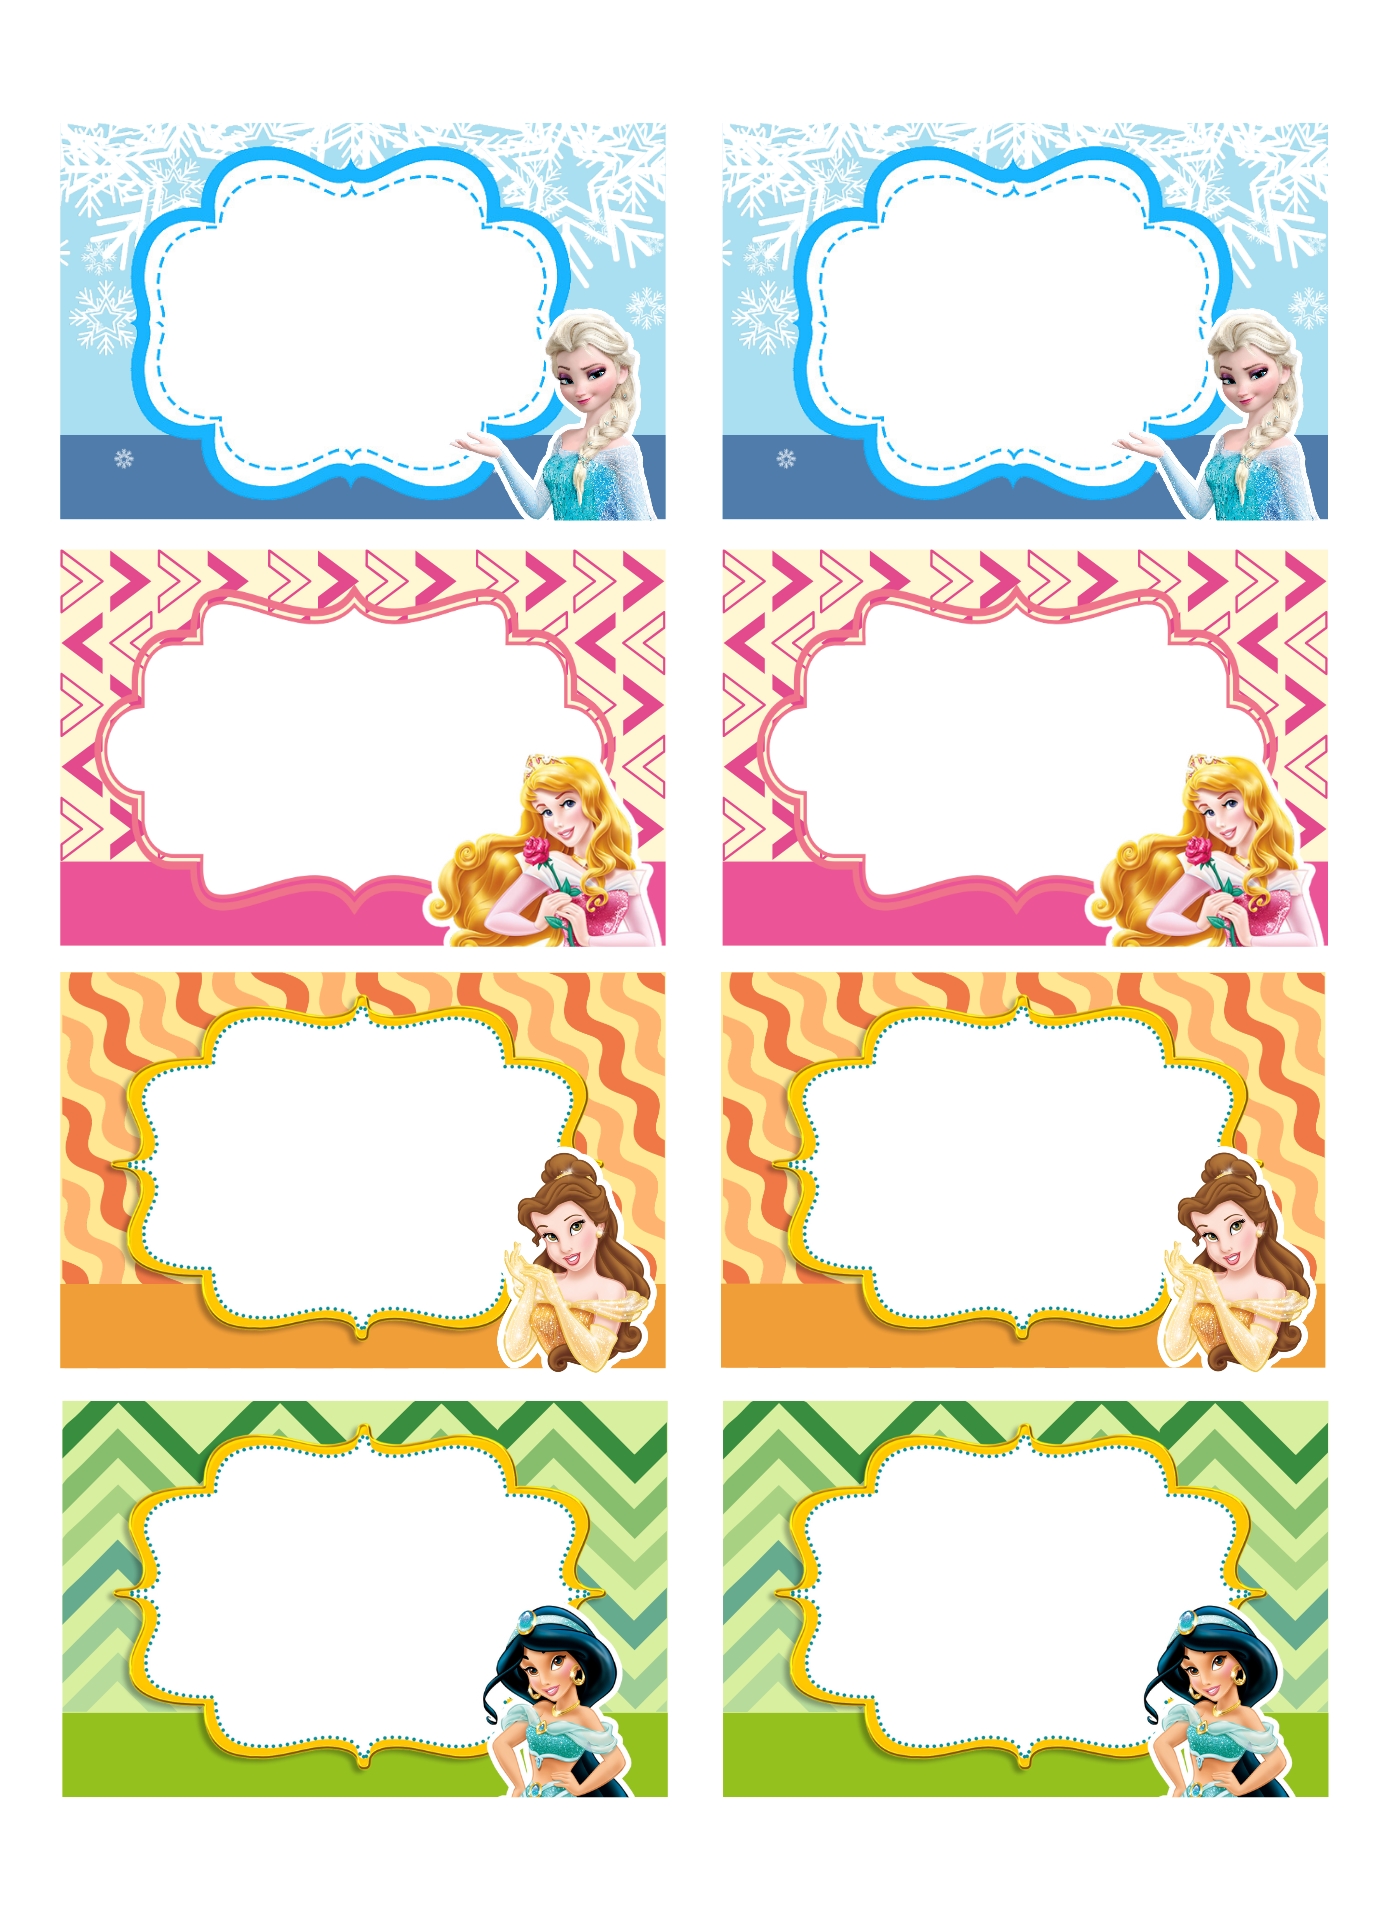 disney-princess-printables-invitations-cards-stationary-and-activities-featuring-disney